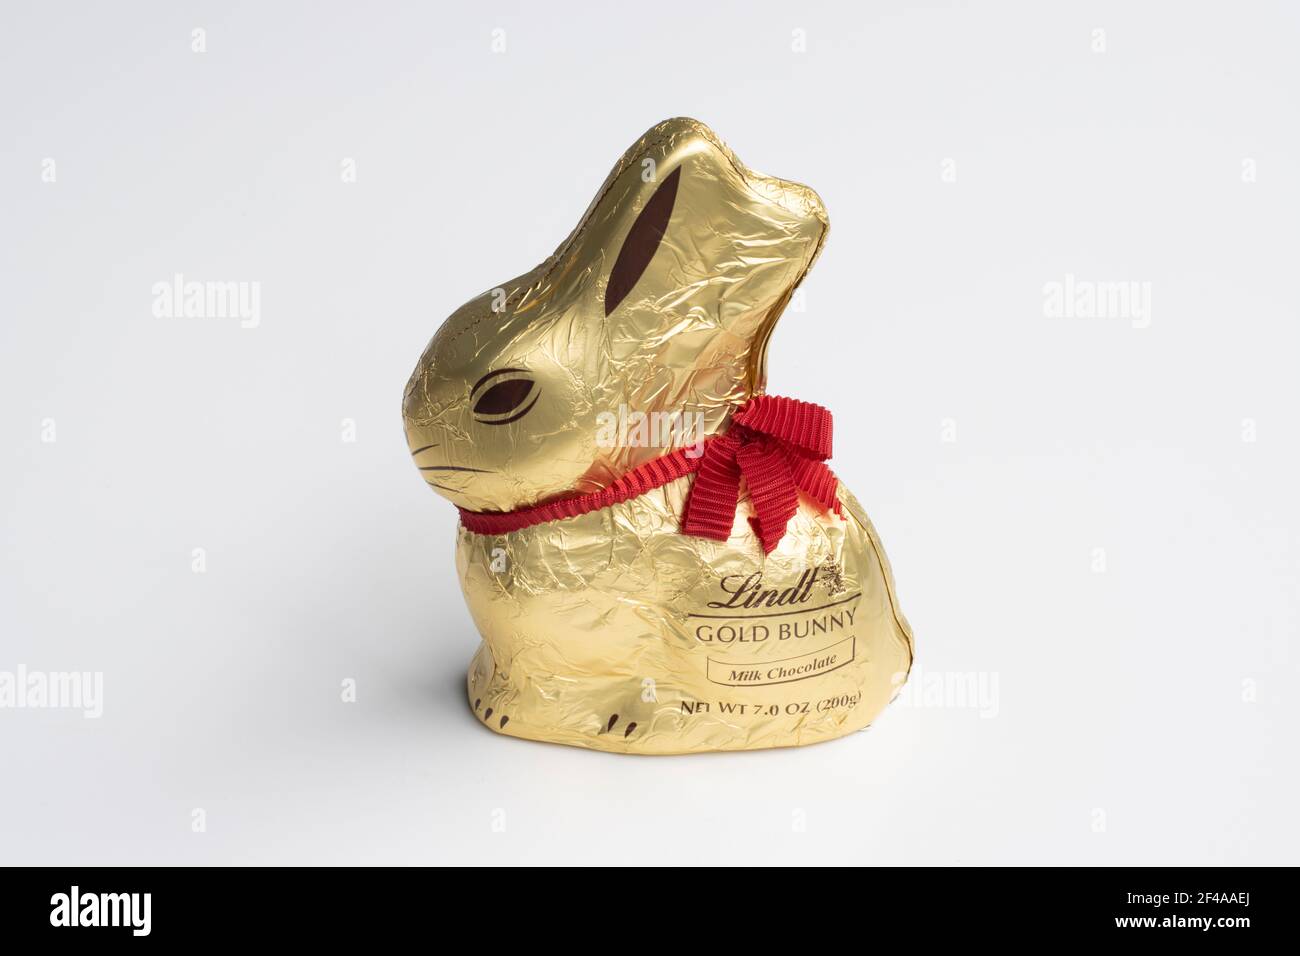 Lindt Gold Bunny isolated on a white background. Milk chocolate Easter bunny wrapped in golden foil with a red ribbon, produced by Lindt, a Swiss ... Stock Photo